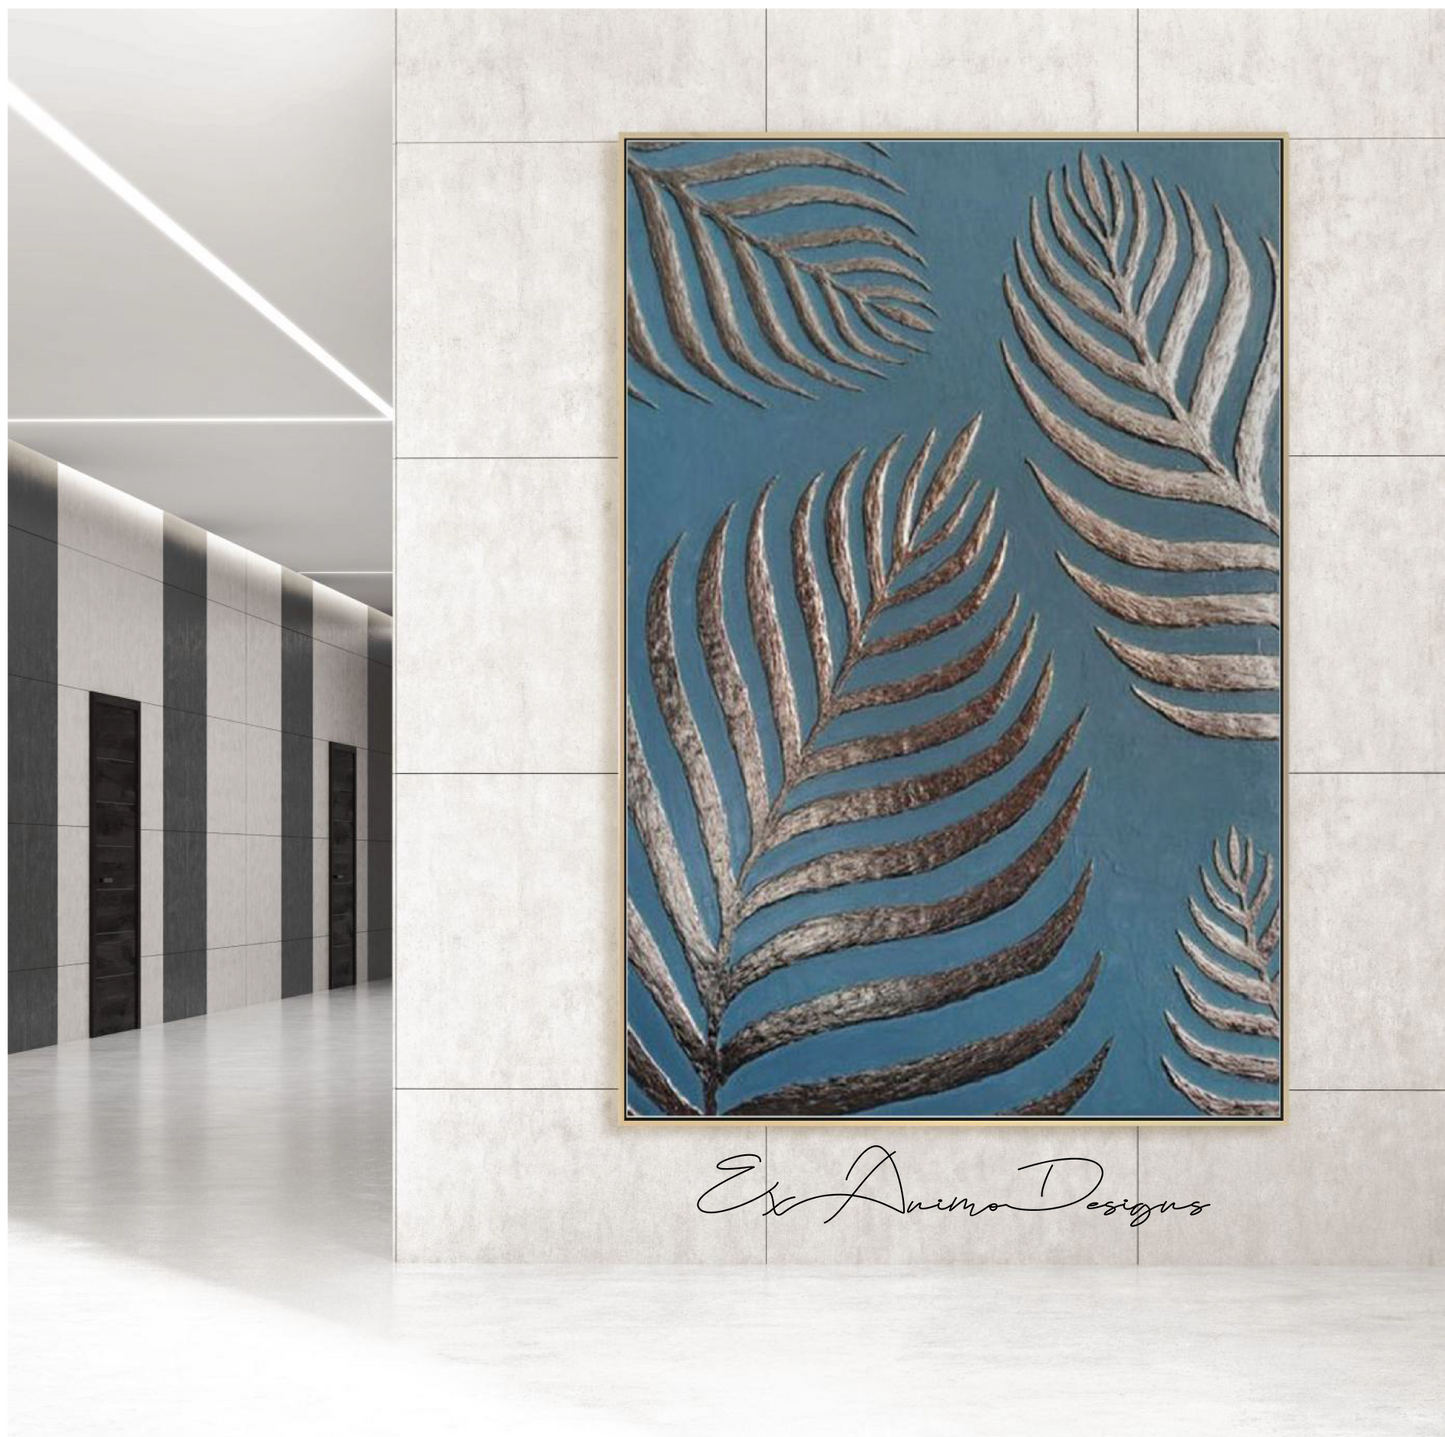 Ex Animo Designs -  Hand Painted Golden Leaves Oil Painting